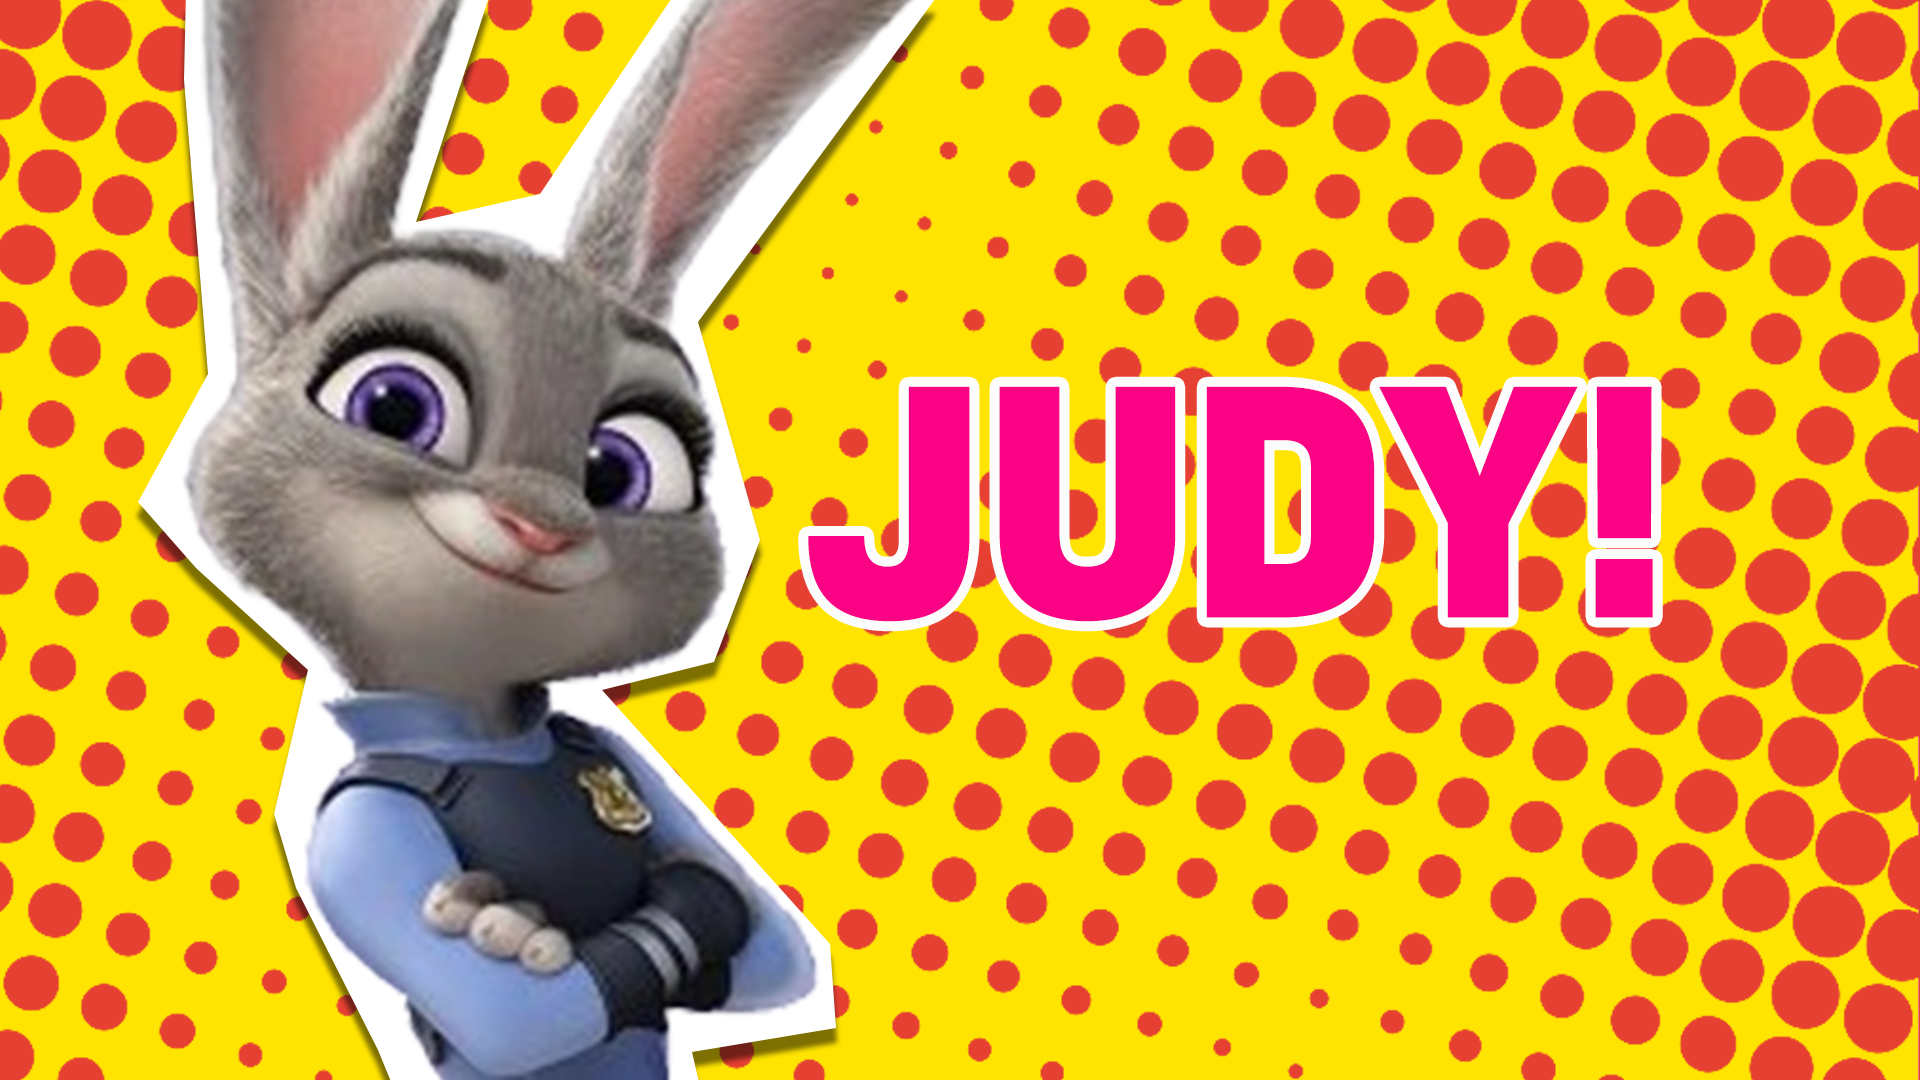 You're most like Judy! You're reliable, determined and always want to do your best! People don't always take you seriously, but they should!